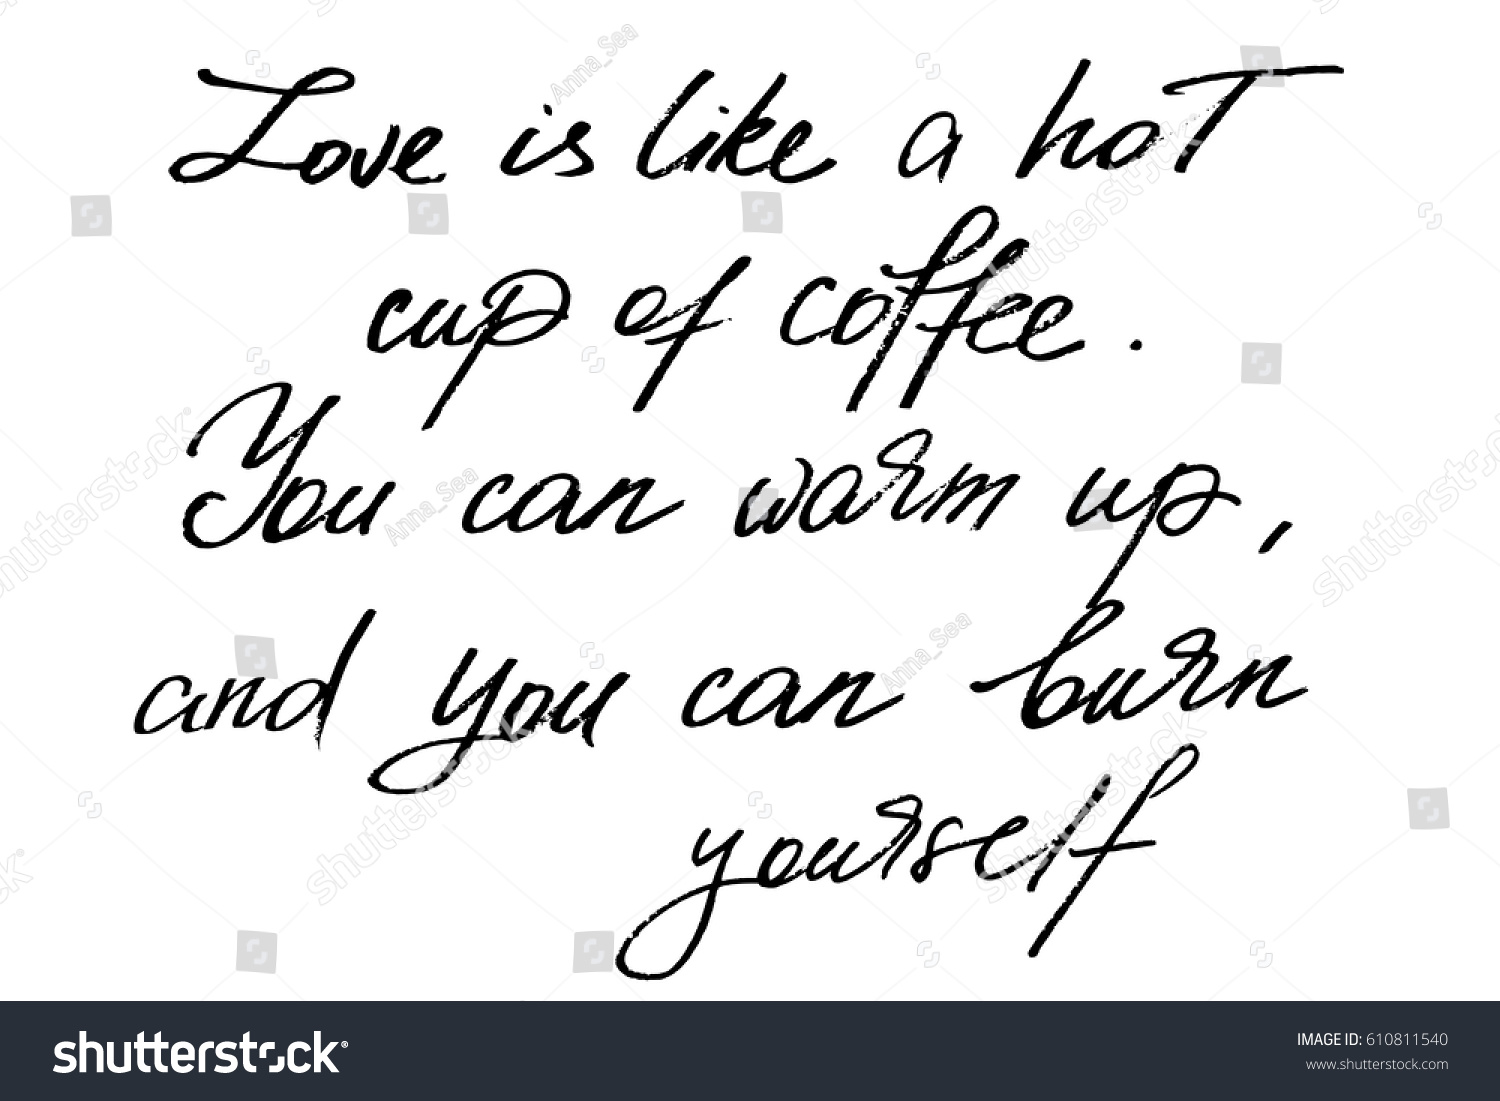 Love phrase quote handwriting love is like a hot cup of coffee You can warm